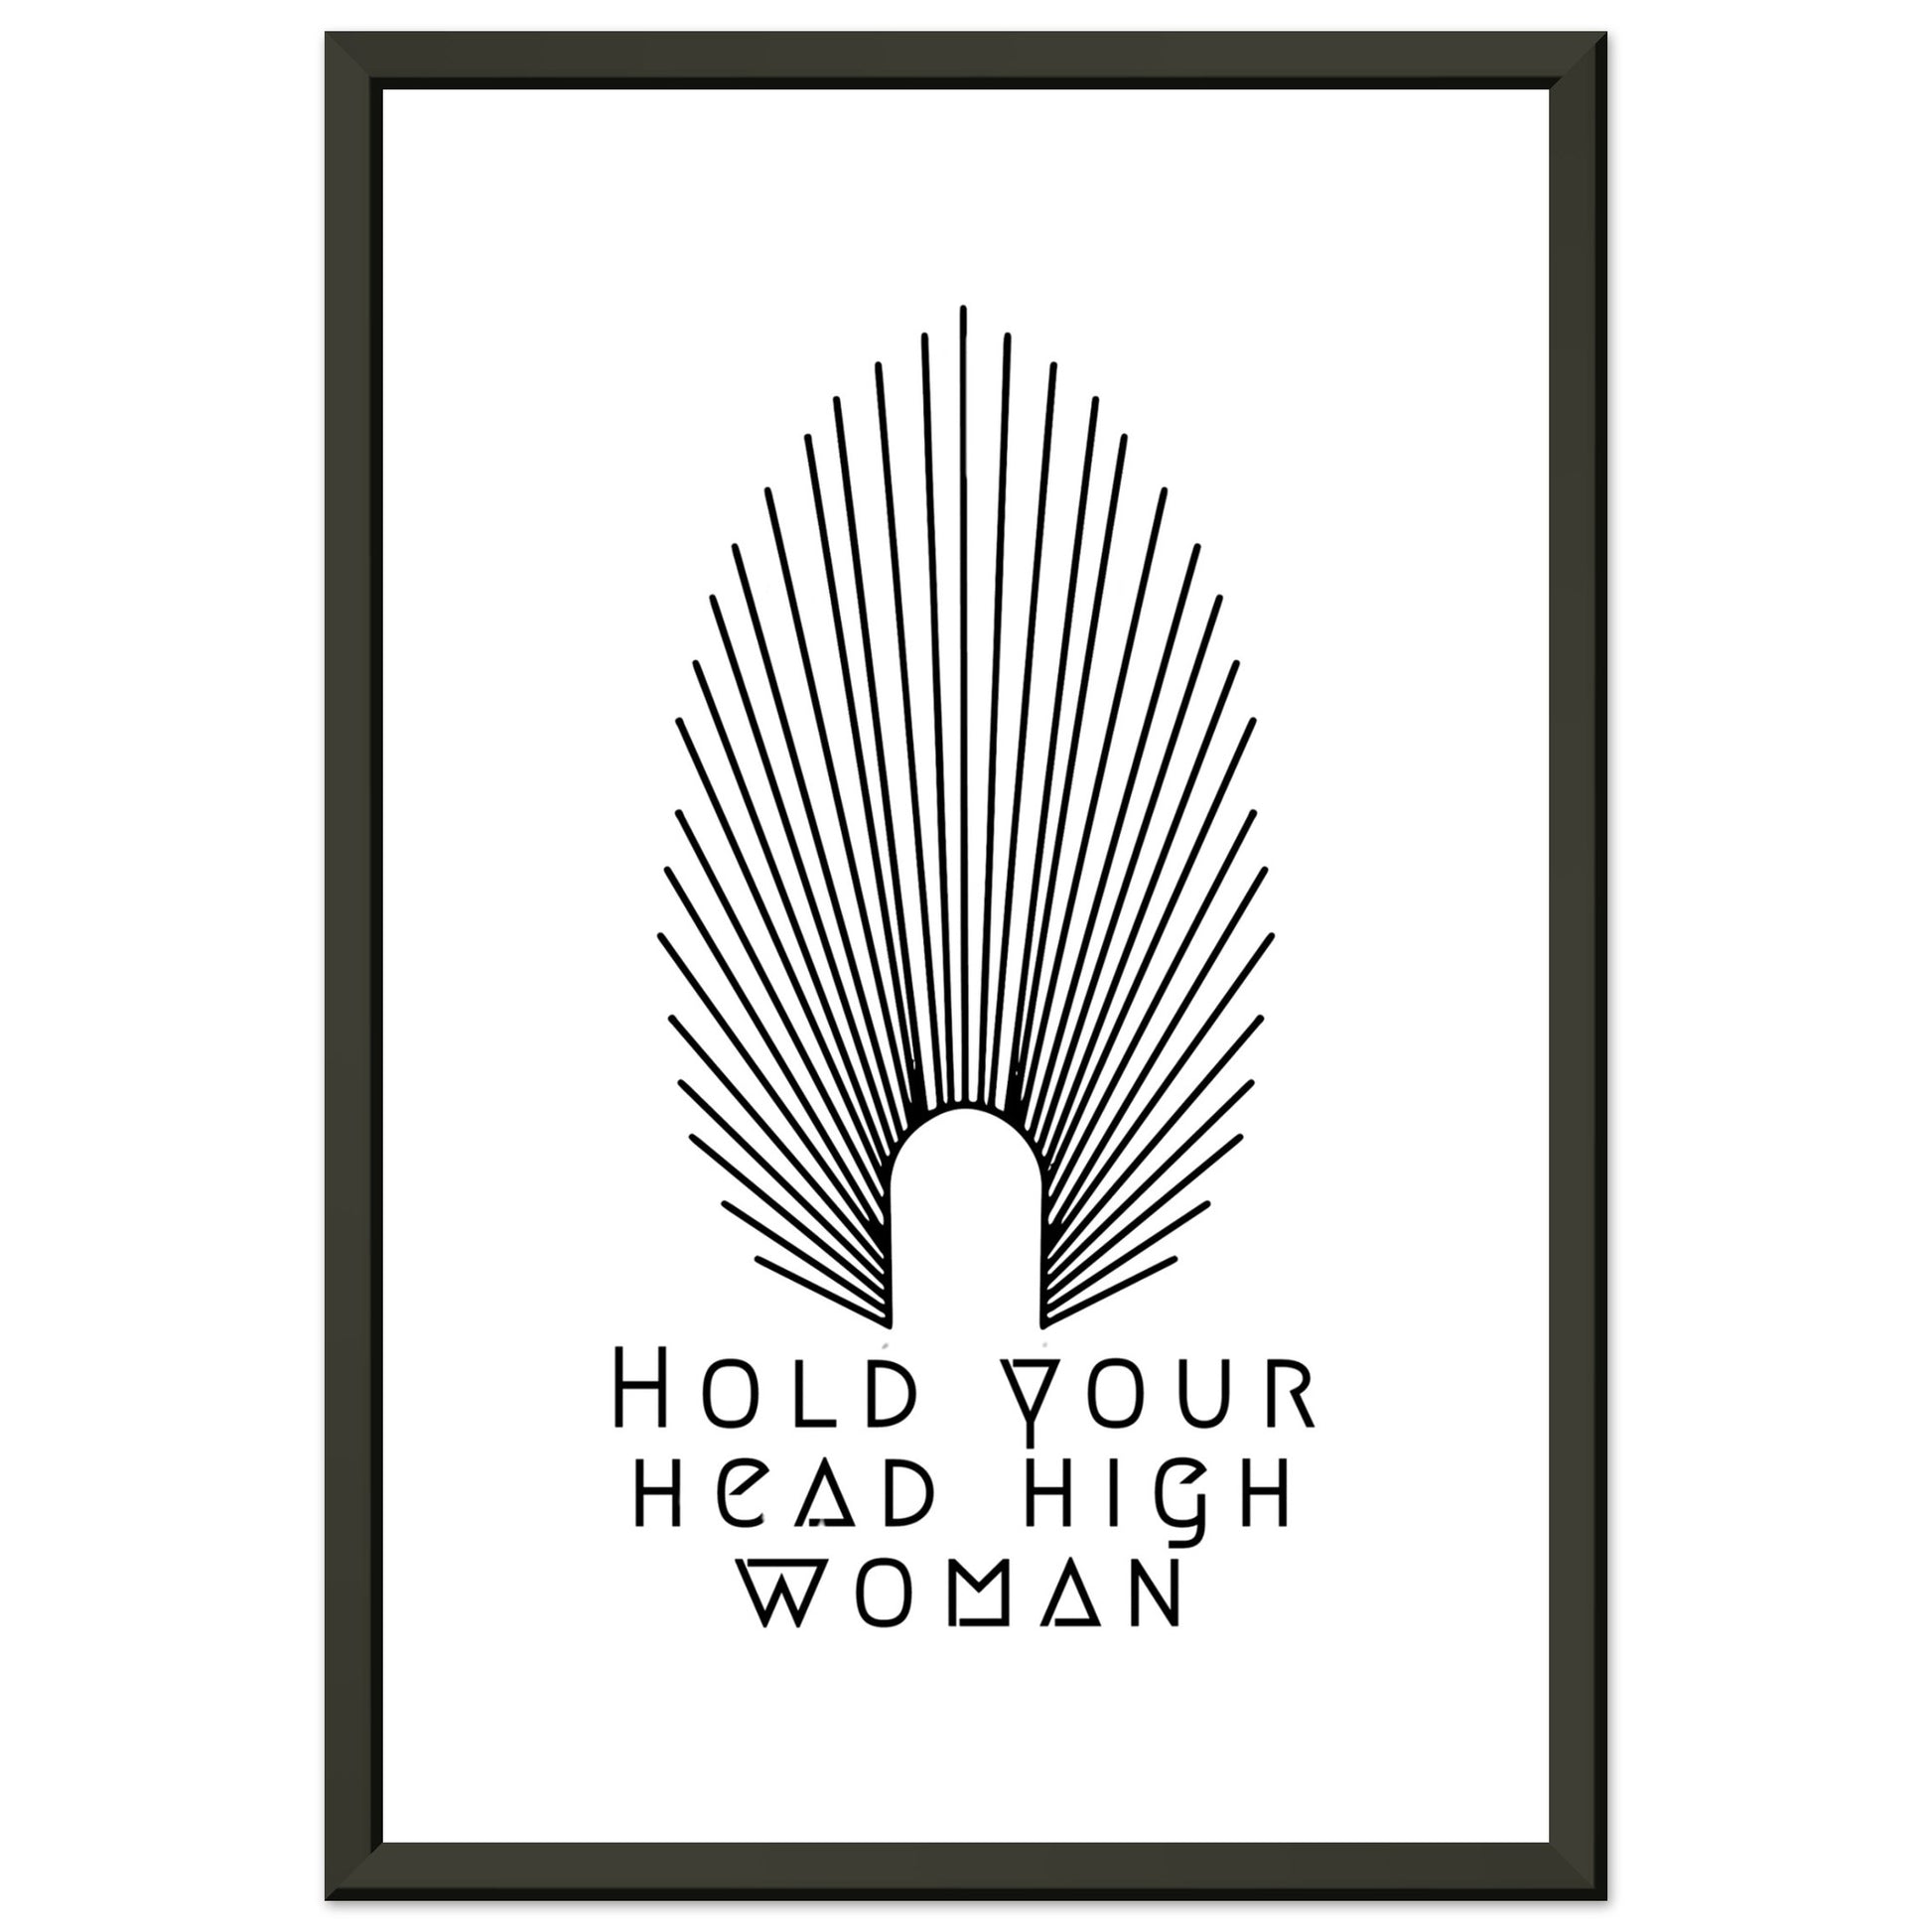 HEAD HIGH [w] | METAL FRAMED PosterPremium Quality | Matte | 200 GSM | Feminism | Art Déco | Save your precious time hunting down the right frame for your art work - with this one your art arrives at your home with the perfectly fitted quality frame! Fine line wall art on white background with black-colored high oval-shaped crown and the saying ' Hold your head high woman' underneath